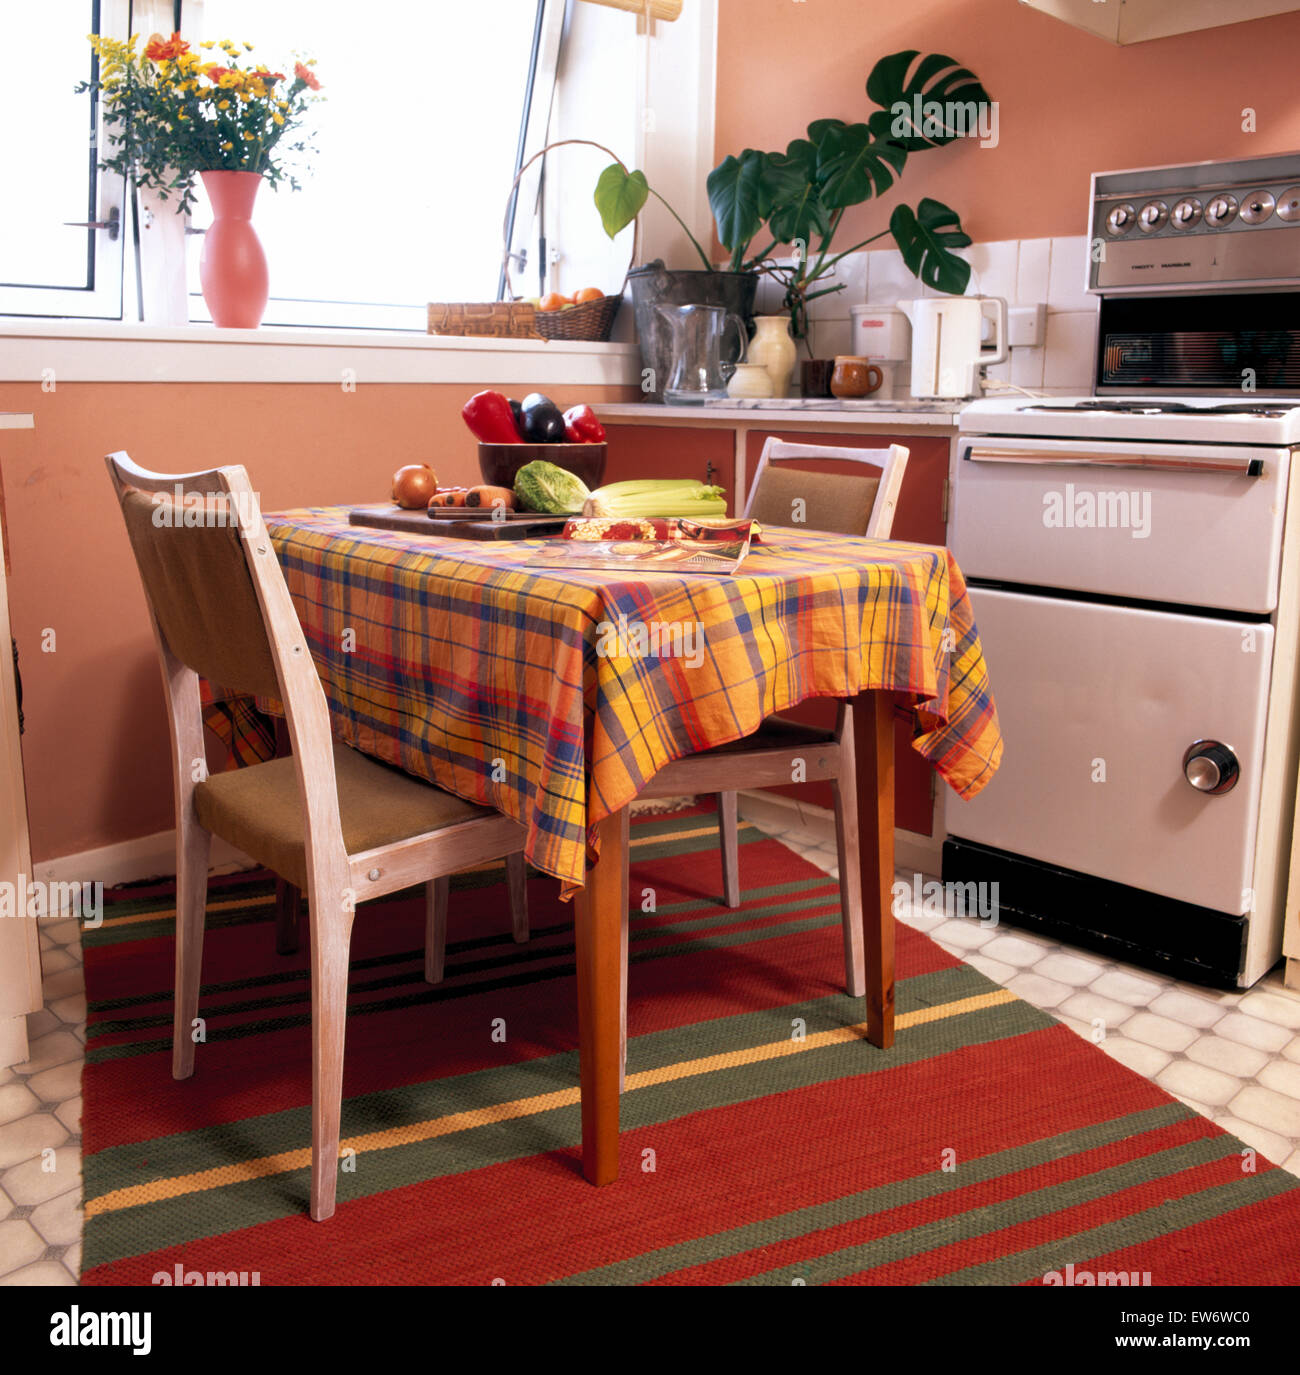 Wooden chairs at table with plaid cloth in economy style nineties kitchen Stock Photo